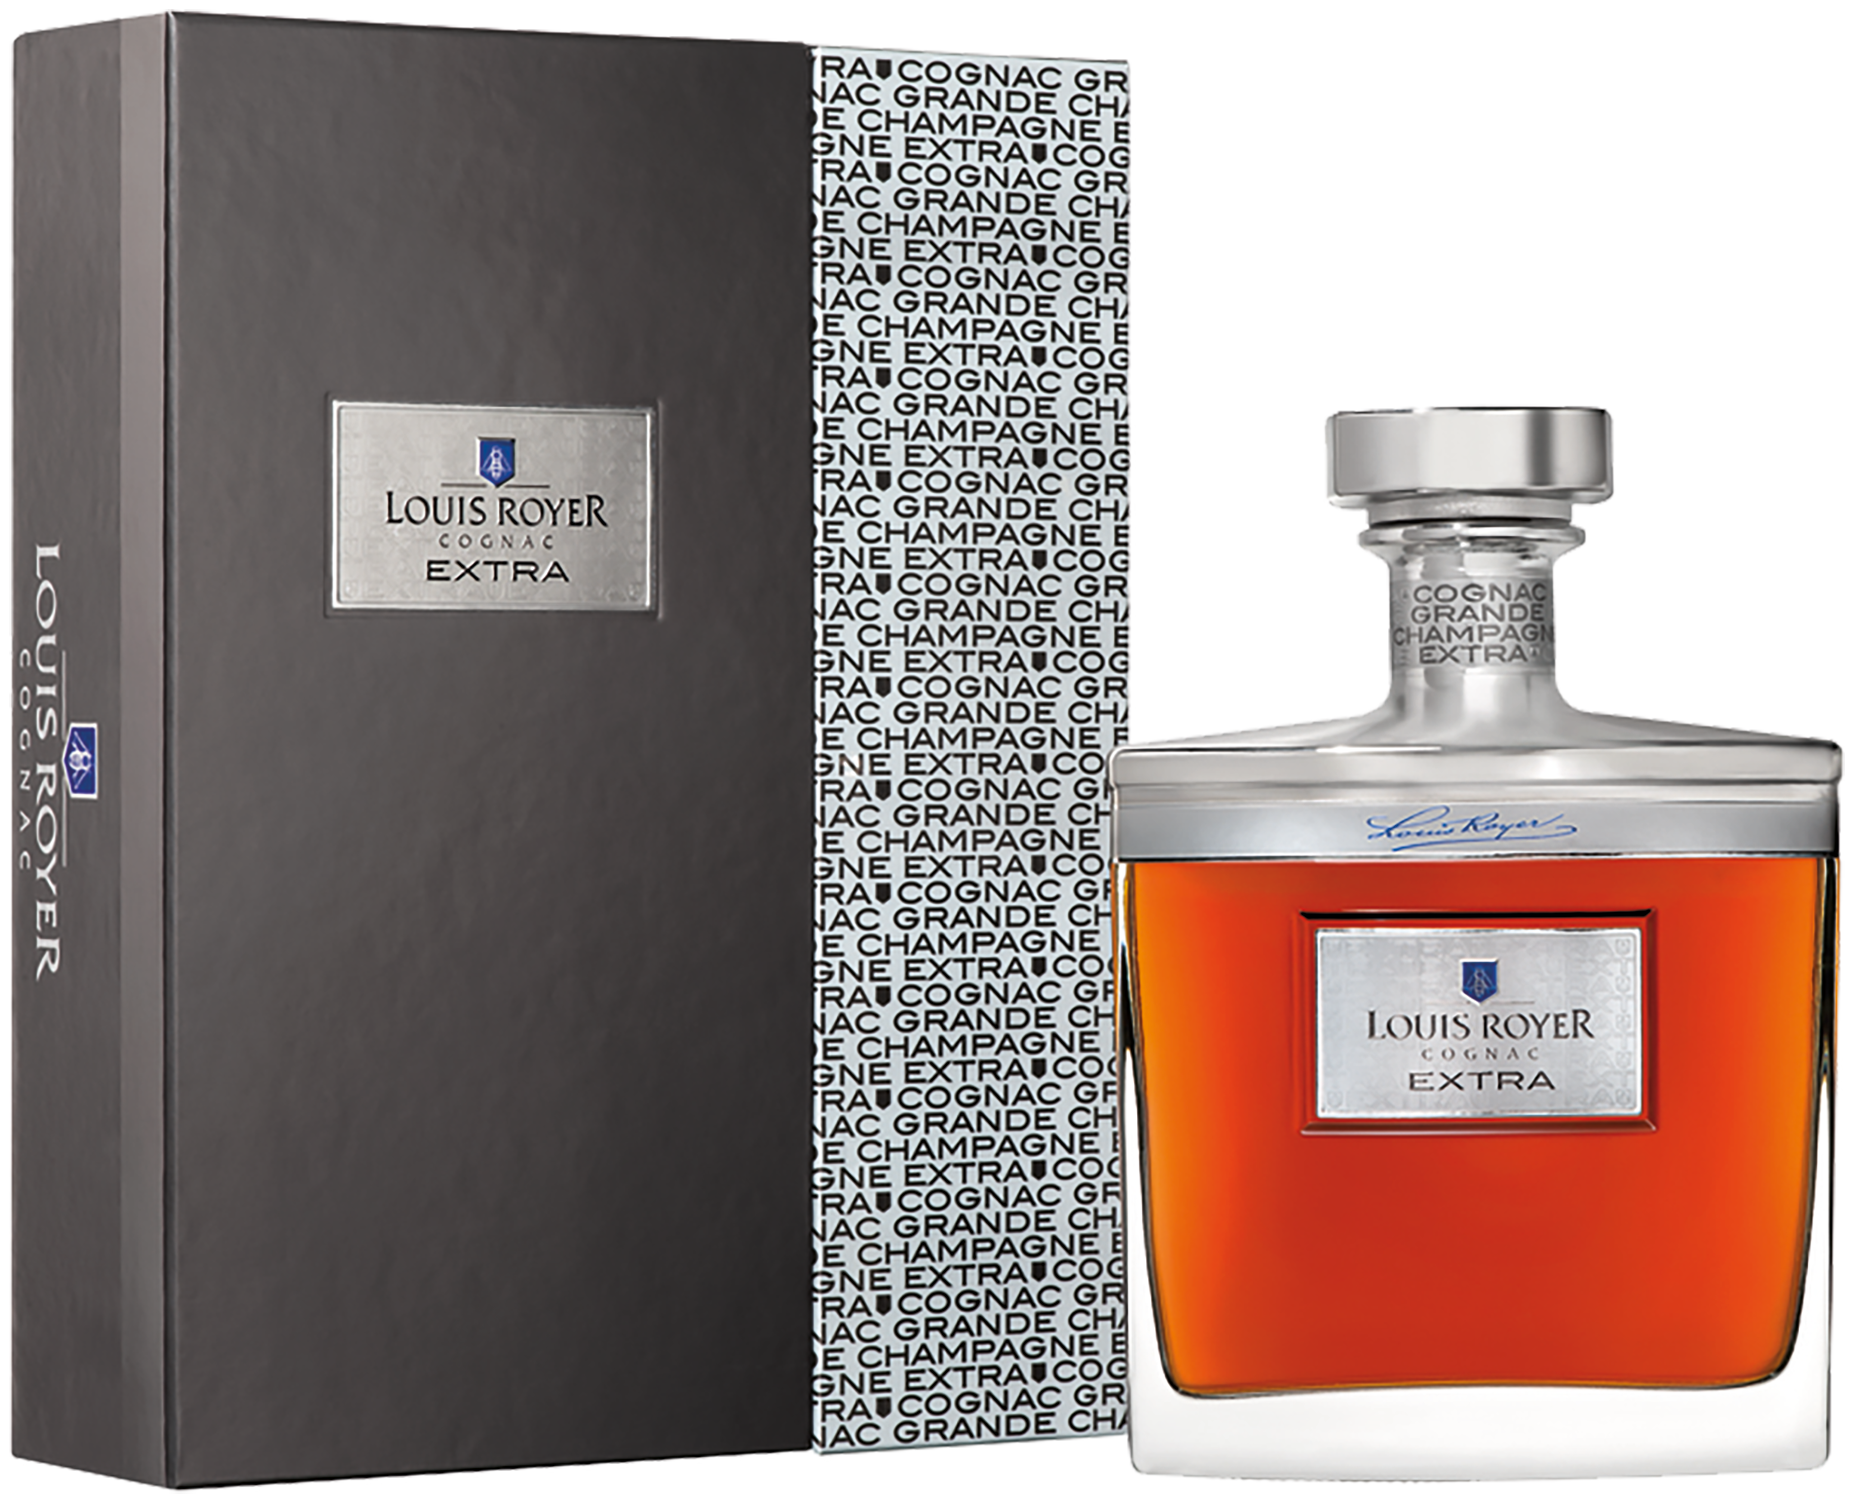 Louis Royer Cognac Grande Champagne Extra (gift box) meukow cognac xo grande champagne gift box